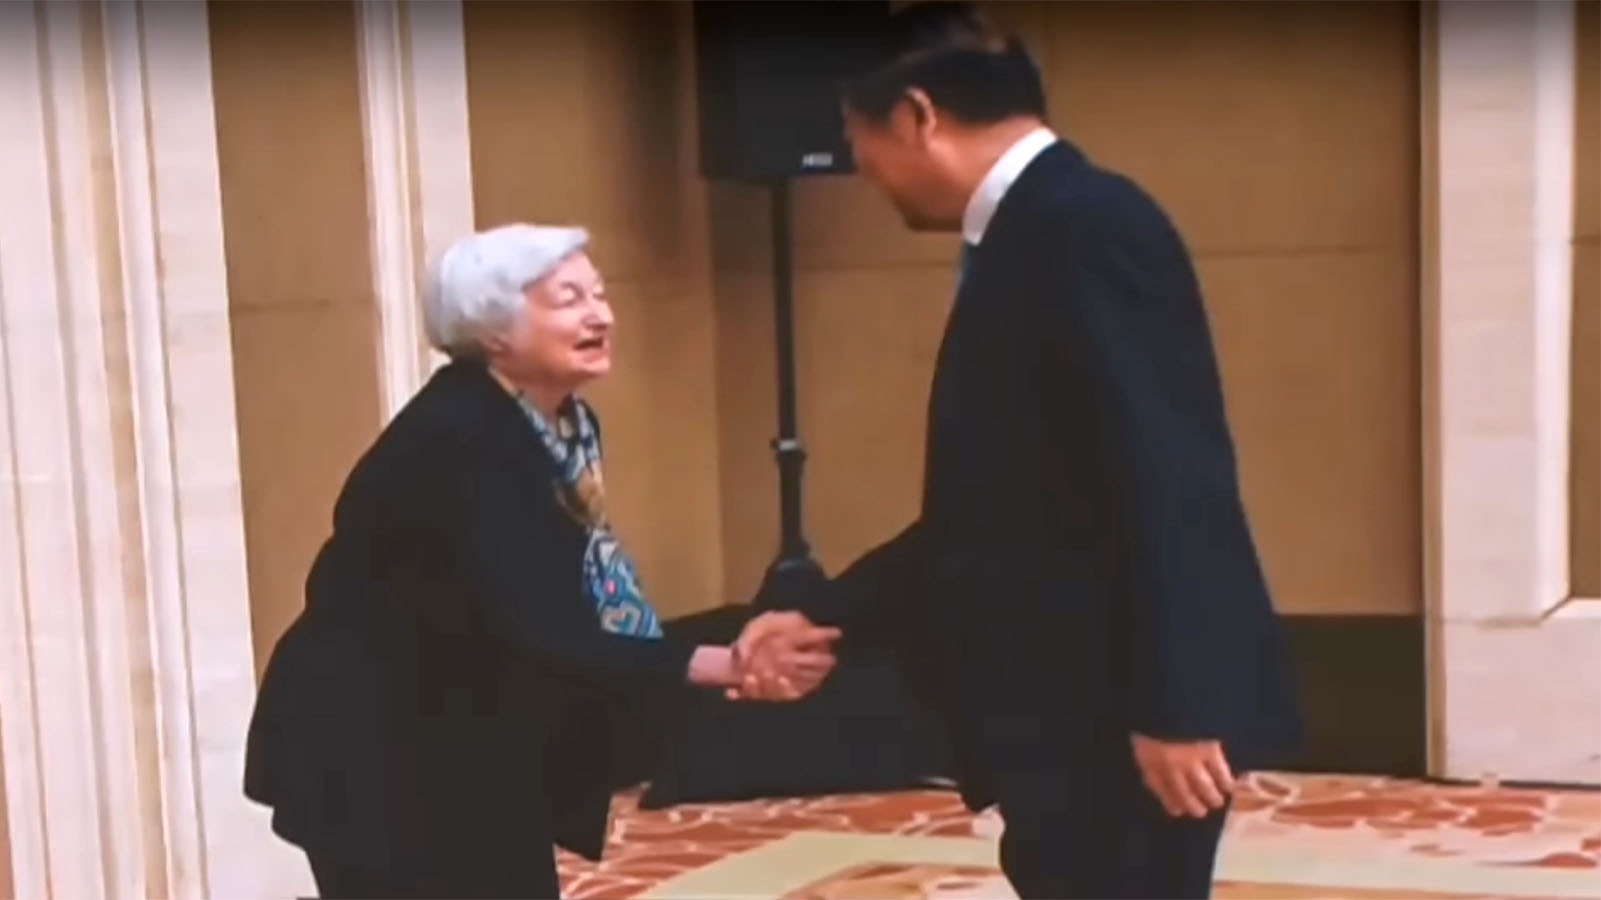 U.S. Secretary of Treasury Janet Yellen bowed several times fast when meeting a Chinese government official.